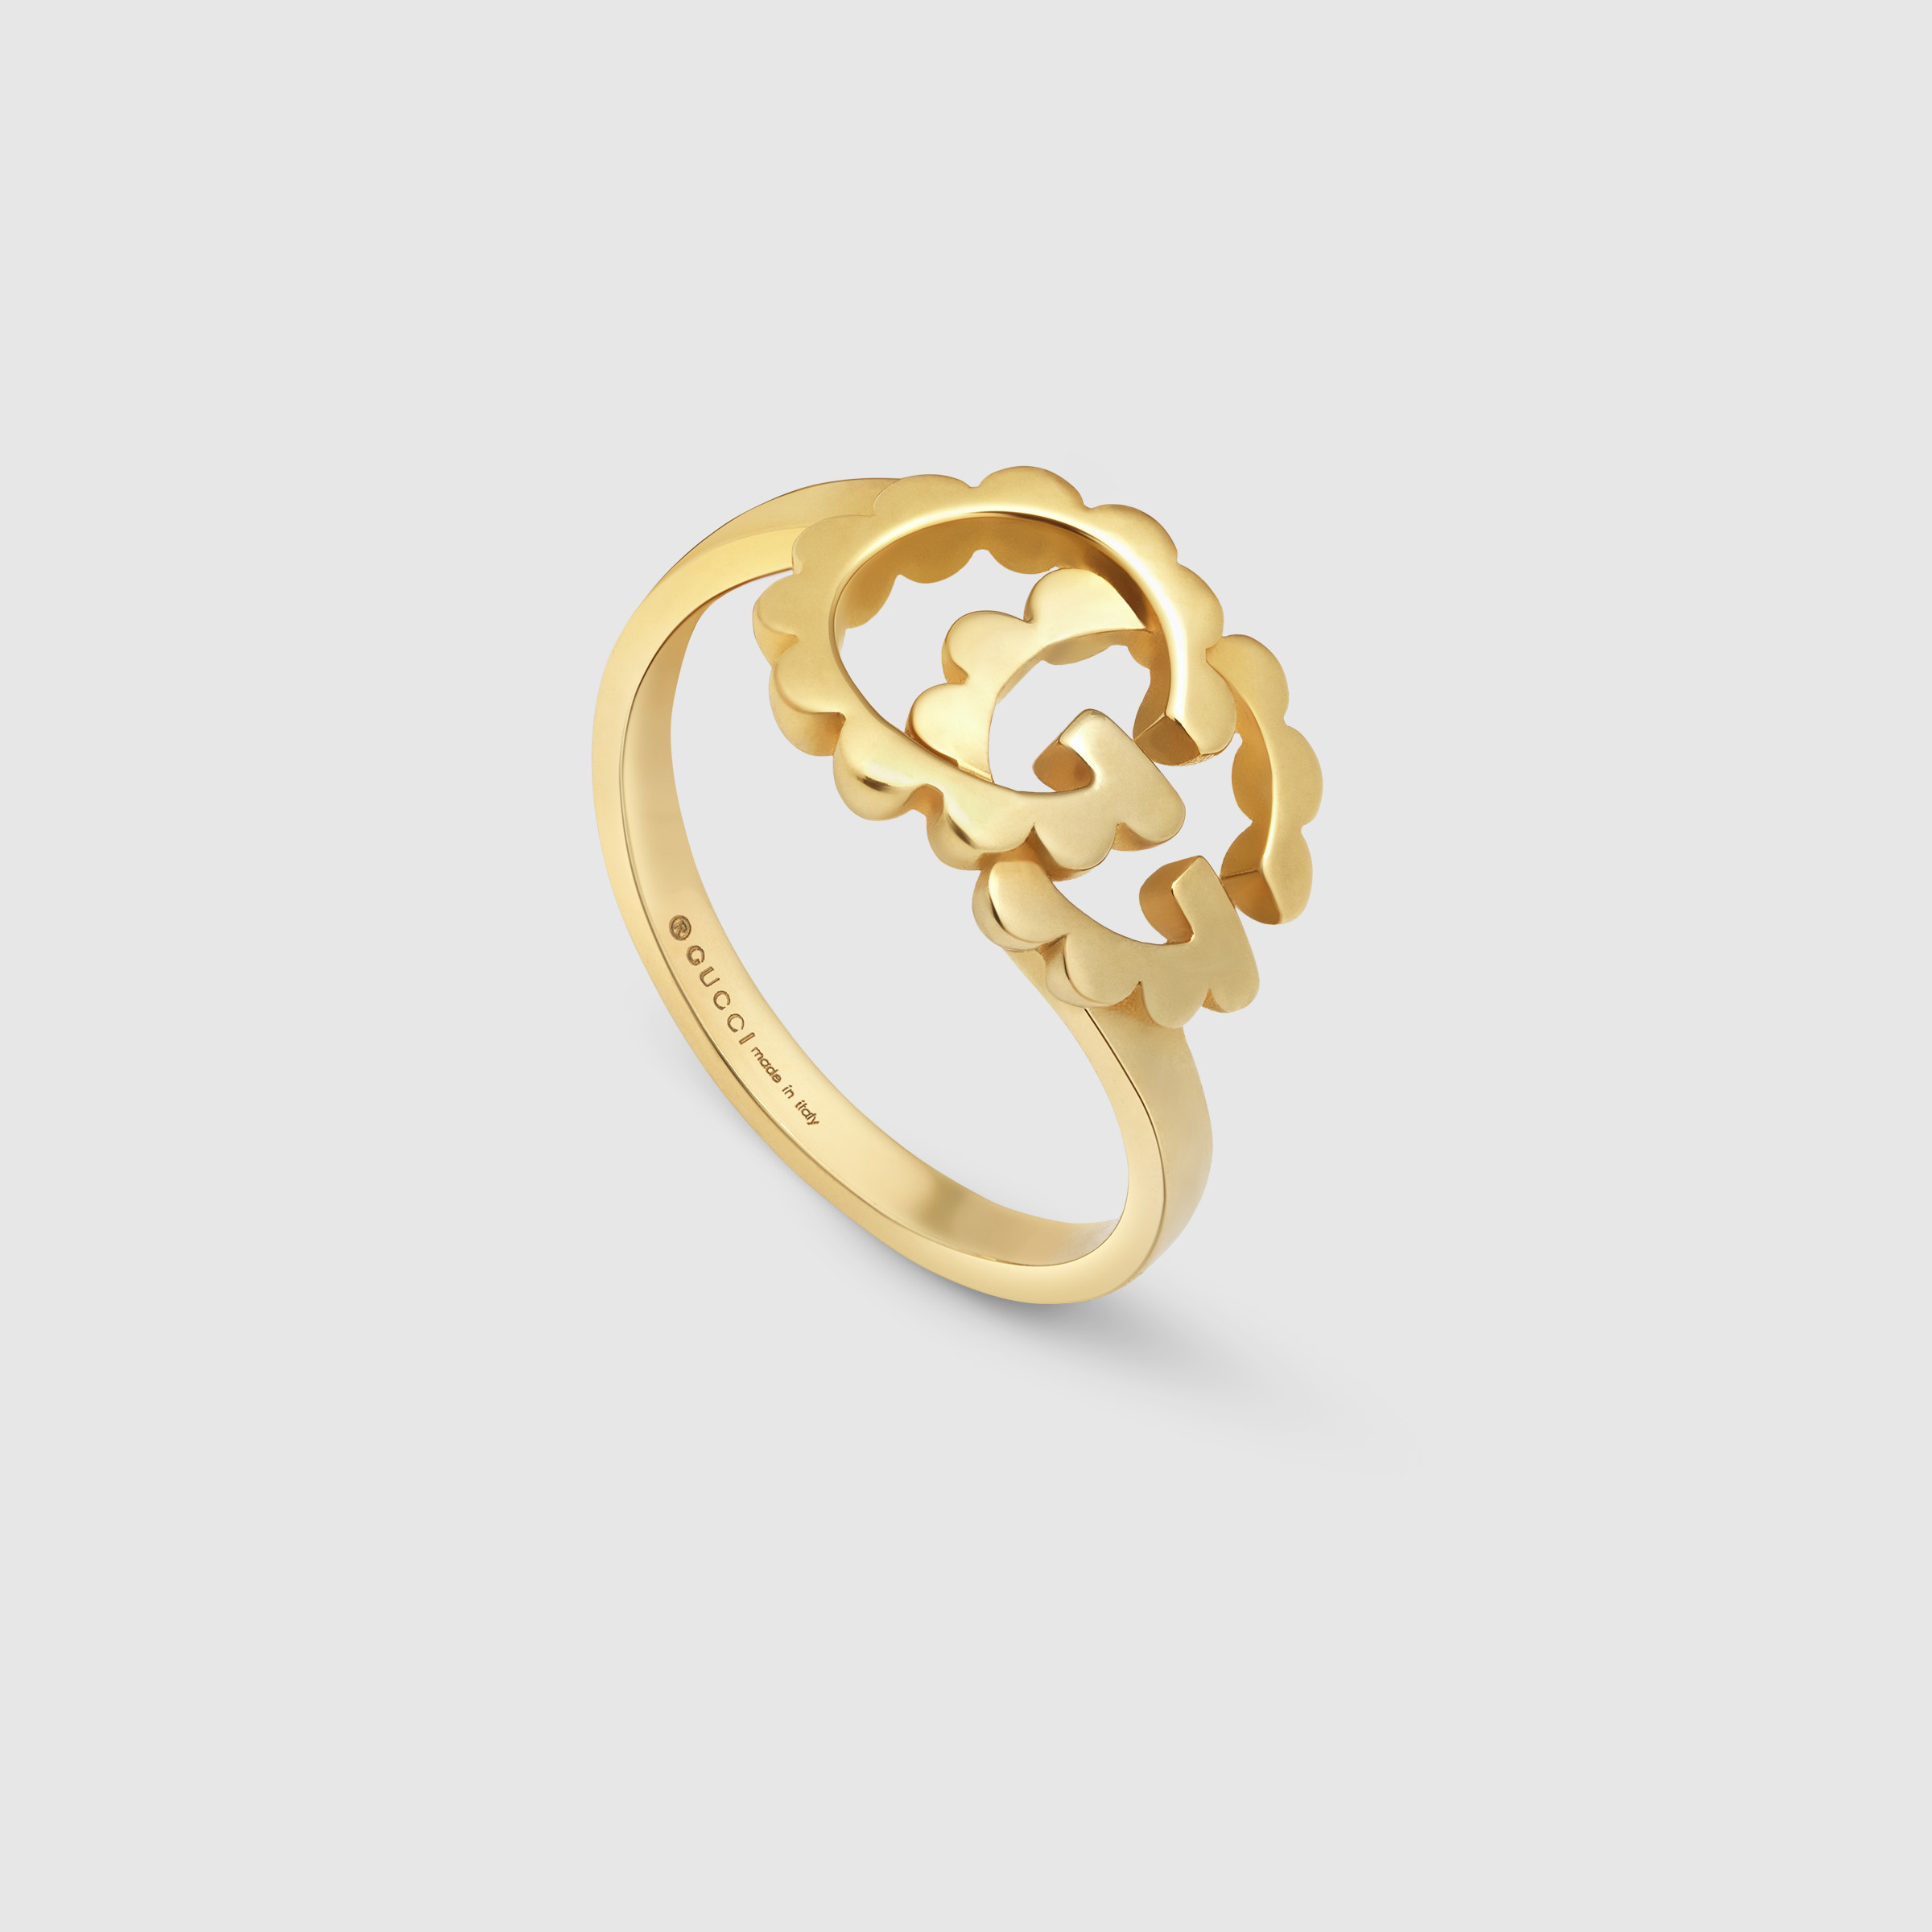 gucci double g yellow gold ring detail 2 JTHDQOI